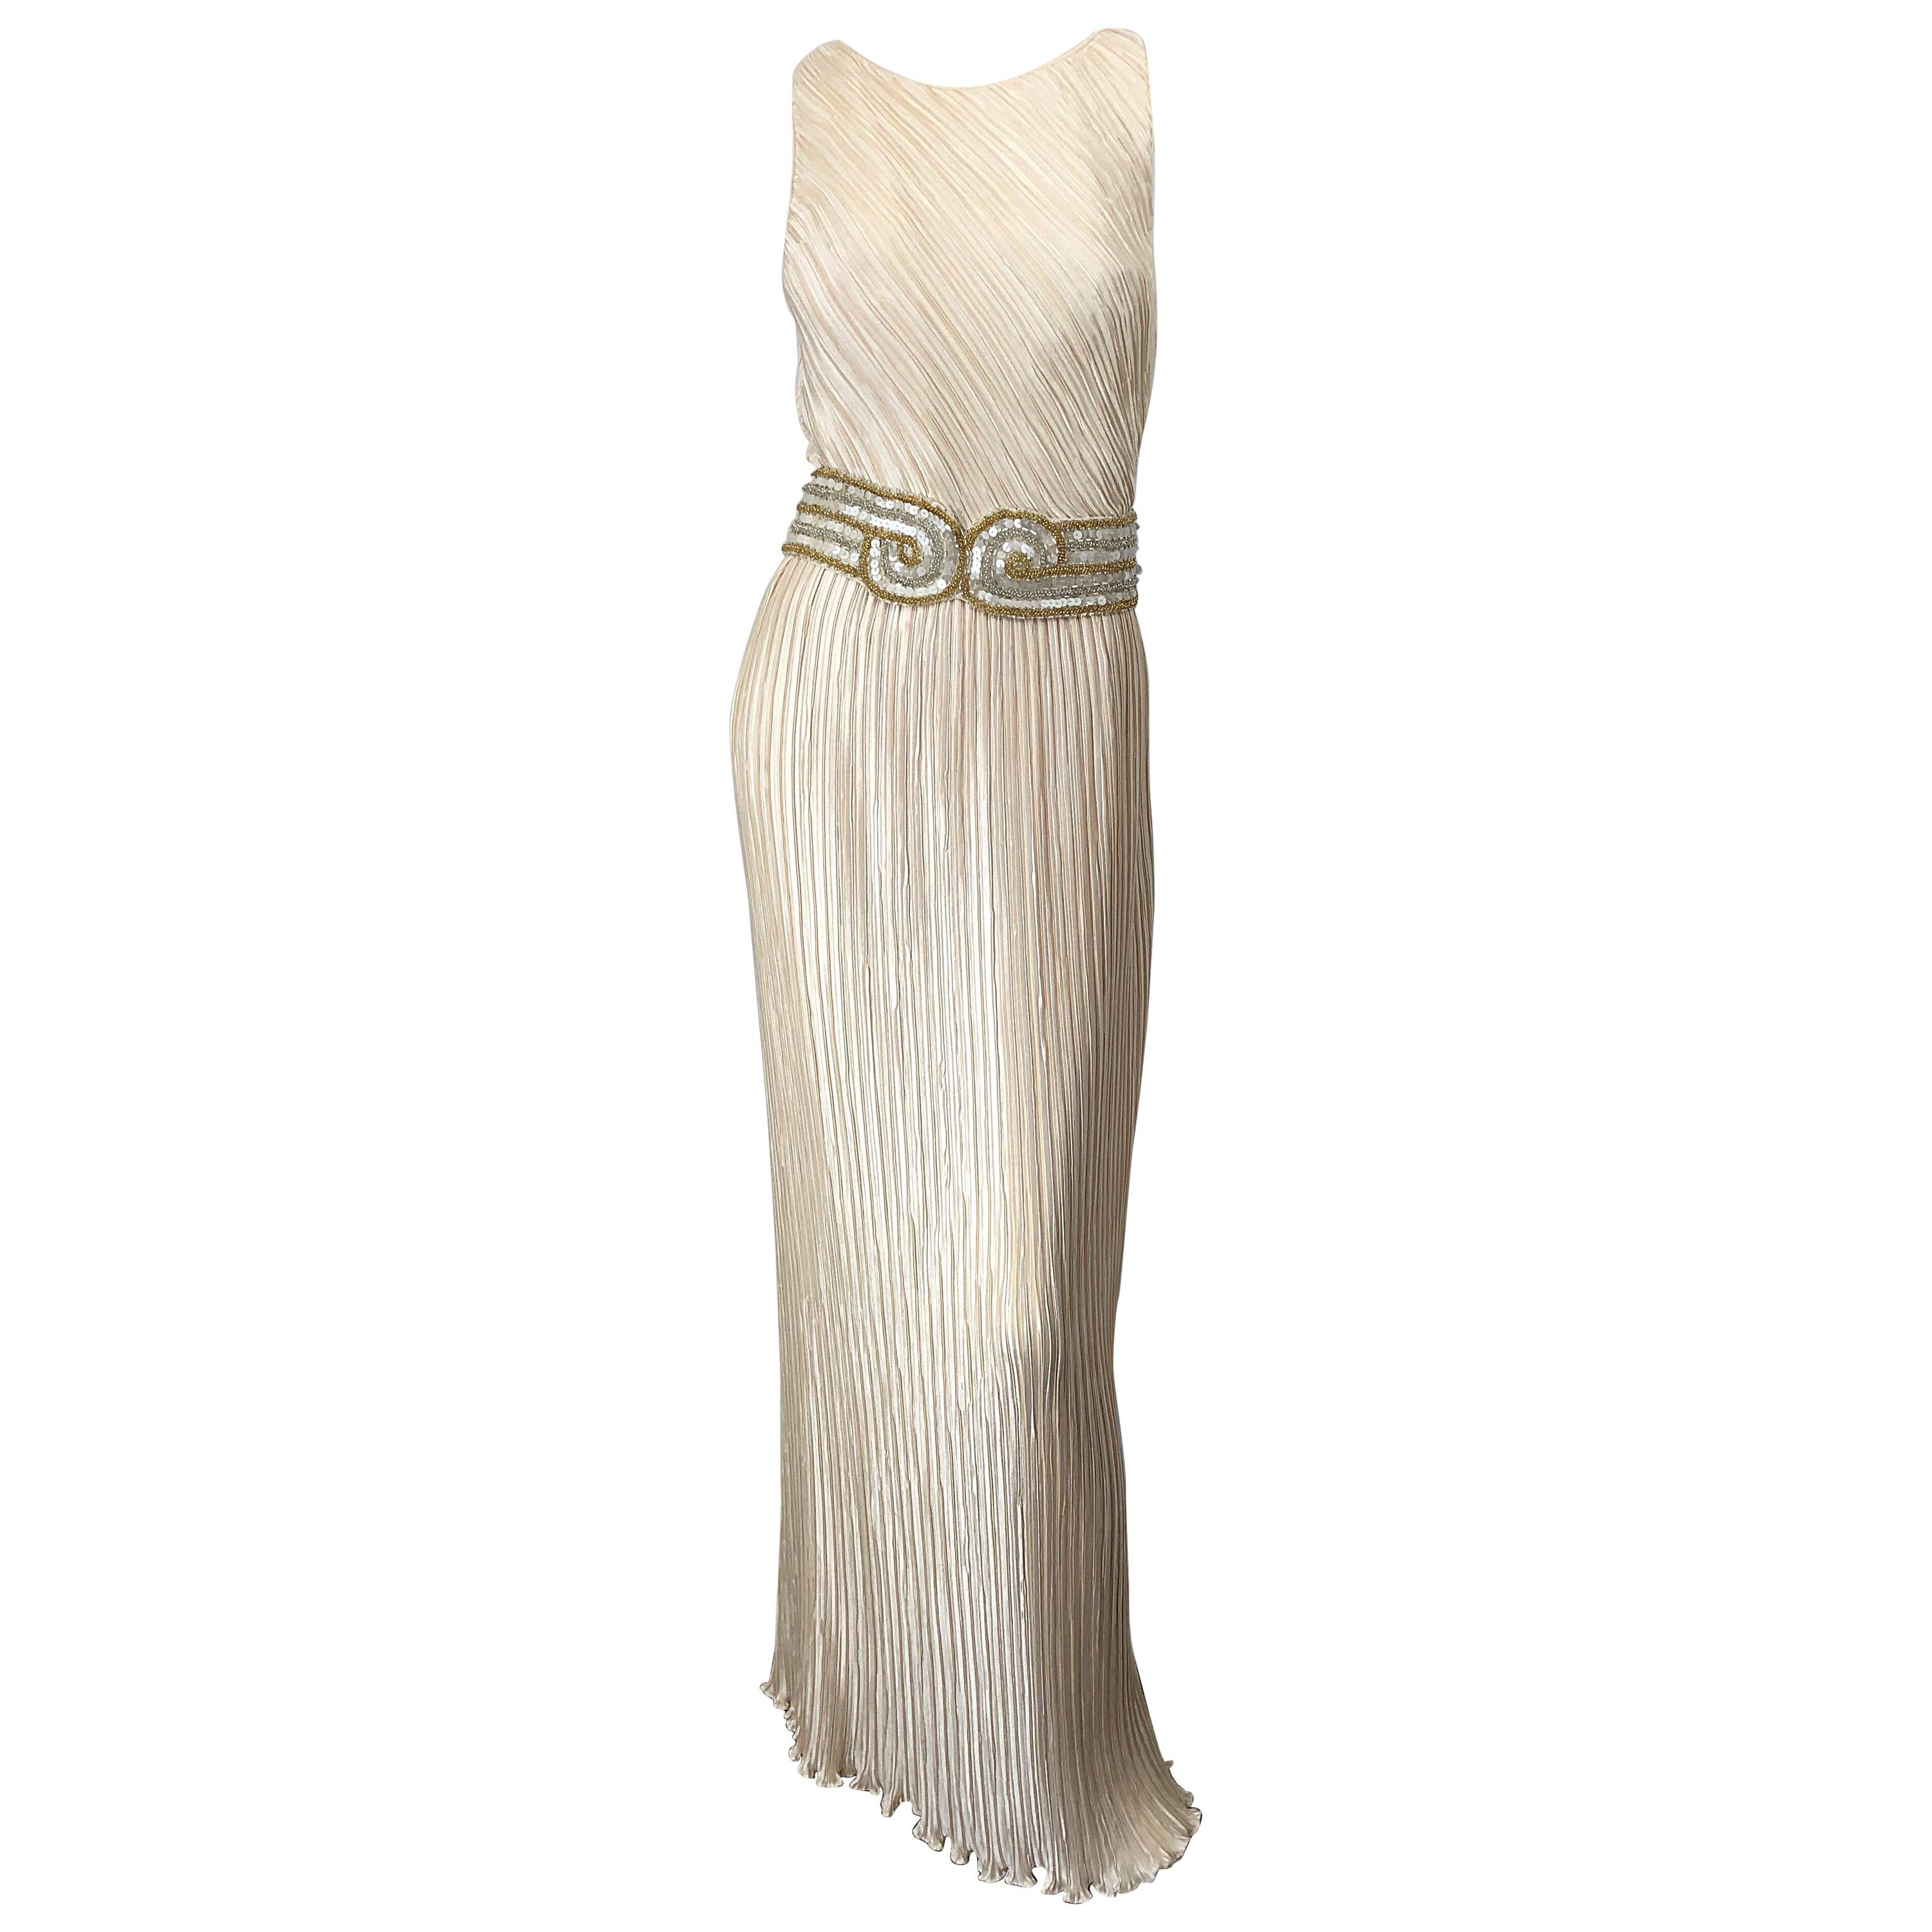 Stunning 90s George F Couture Sz 8 / 10 Ivory Fortuny Pleated Grecian Gown Dress